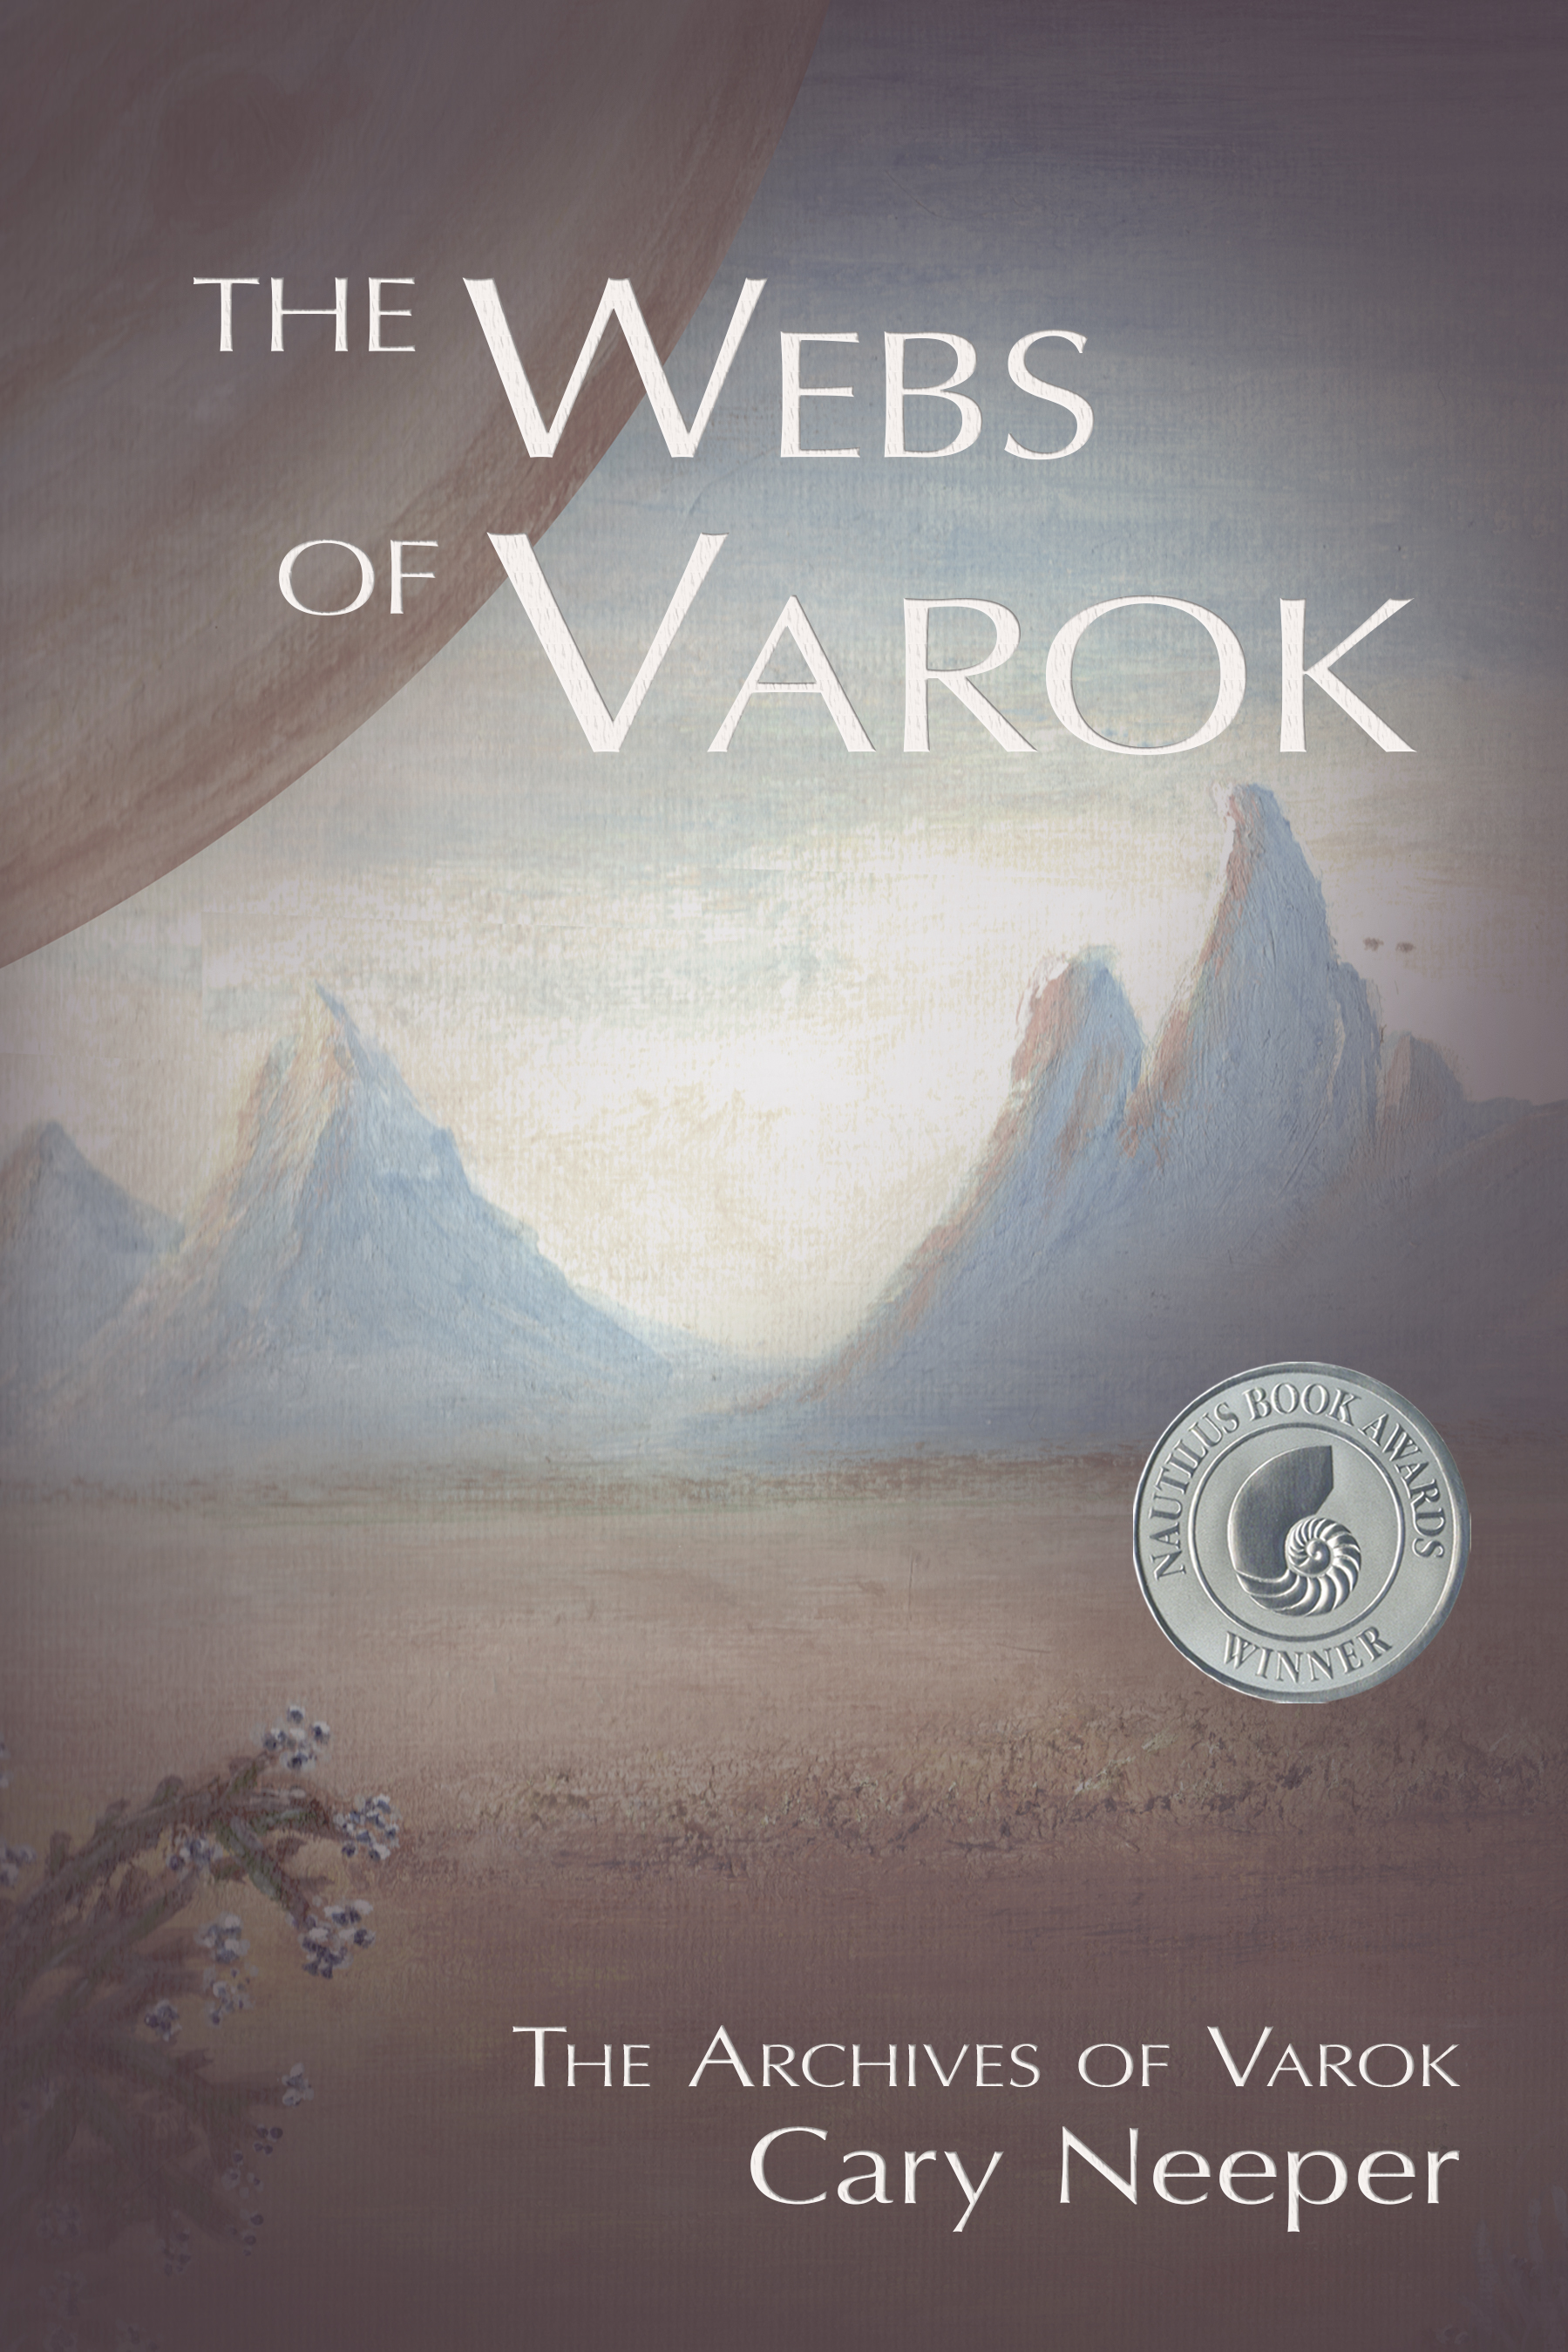 book cover image: the plains of Varok under Jupiter and Nautilus Awards silver medal. Cover painting by Cary Neeper.